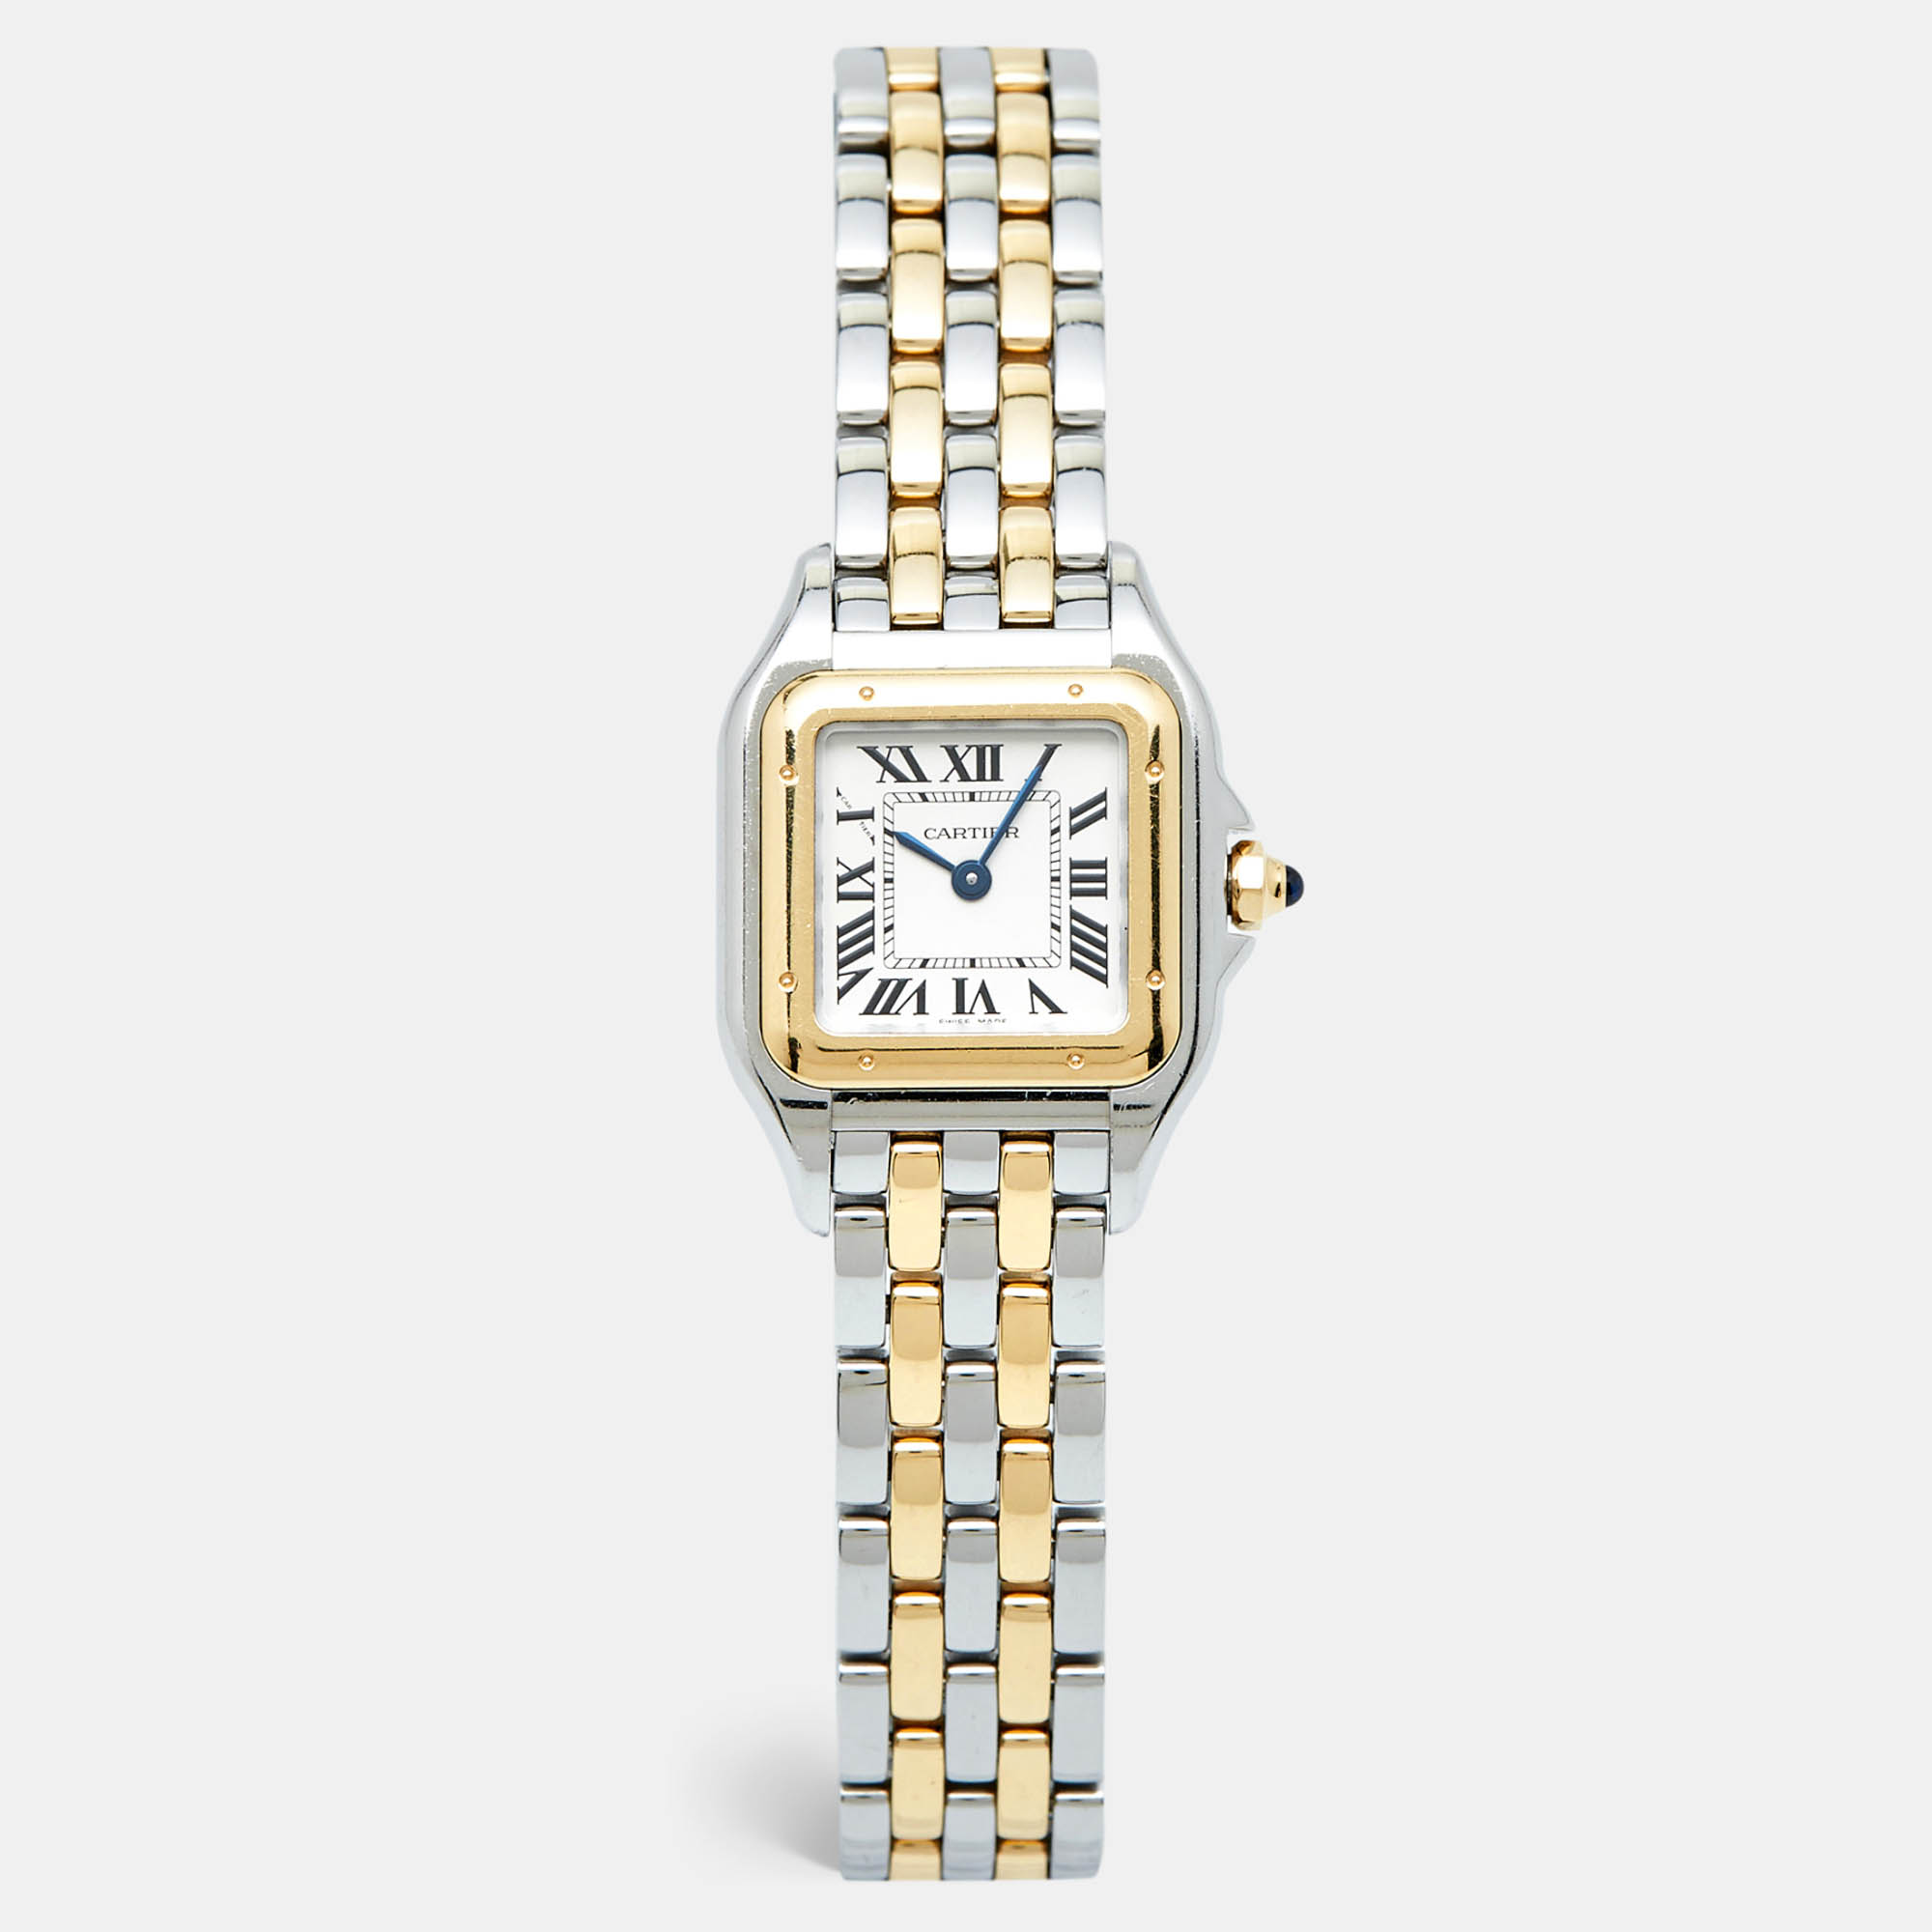 This Panthère de Cartier from Cartier is a creation worthy of being yours. As a true style icon It has a grand fusion of elegance with contemporary charm in every detail from the square case to the concealed clasp. Using stainless steel and 18k yellow gold Cartier sculpted out the watch and had the case held by a chain link bracelet. The case is fitted with a silver dial featuring Roman numeral hour markers and two blue hands. This Quartz timepiece is a symbol of ageless beauty